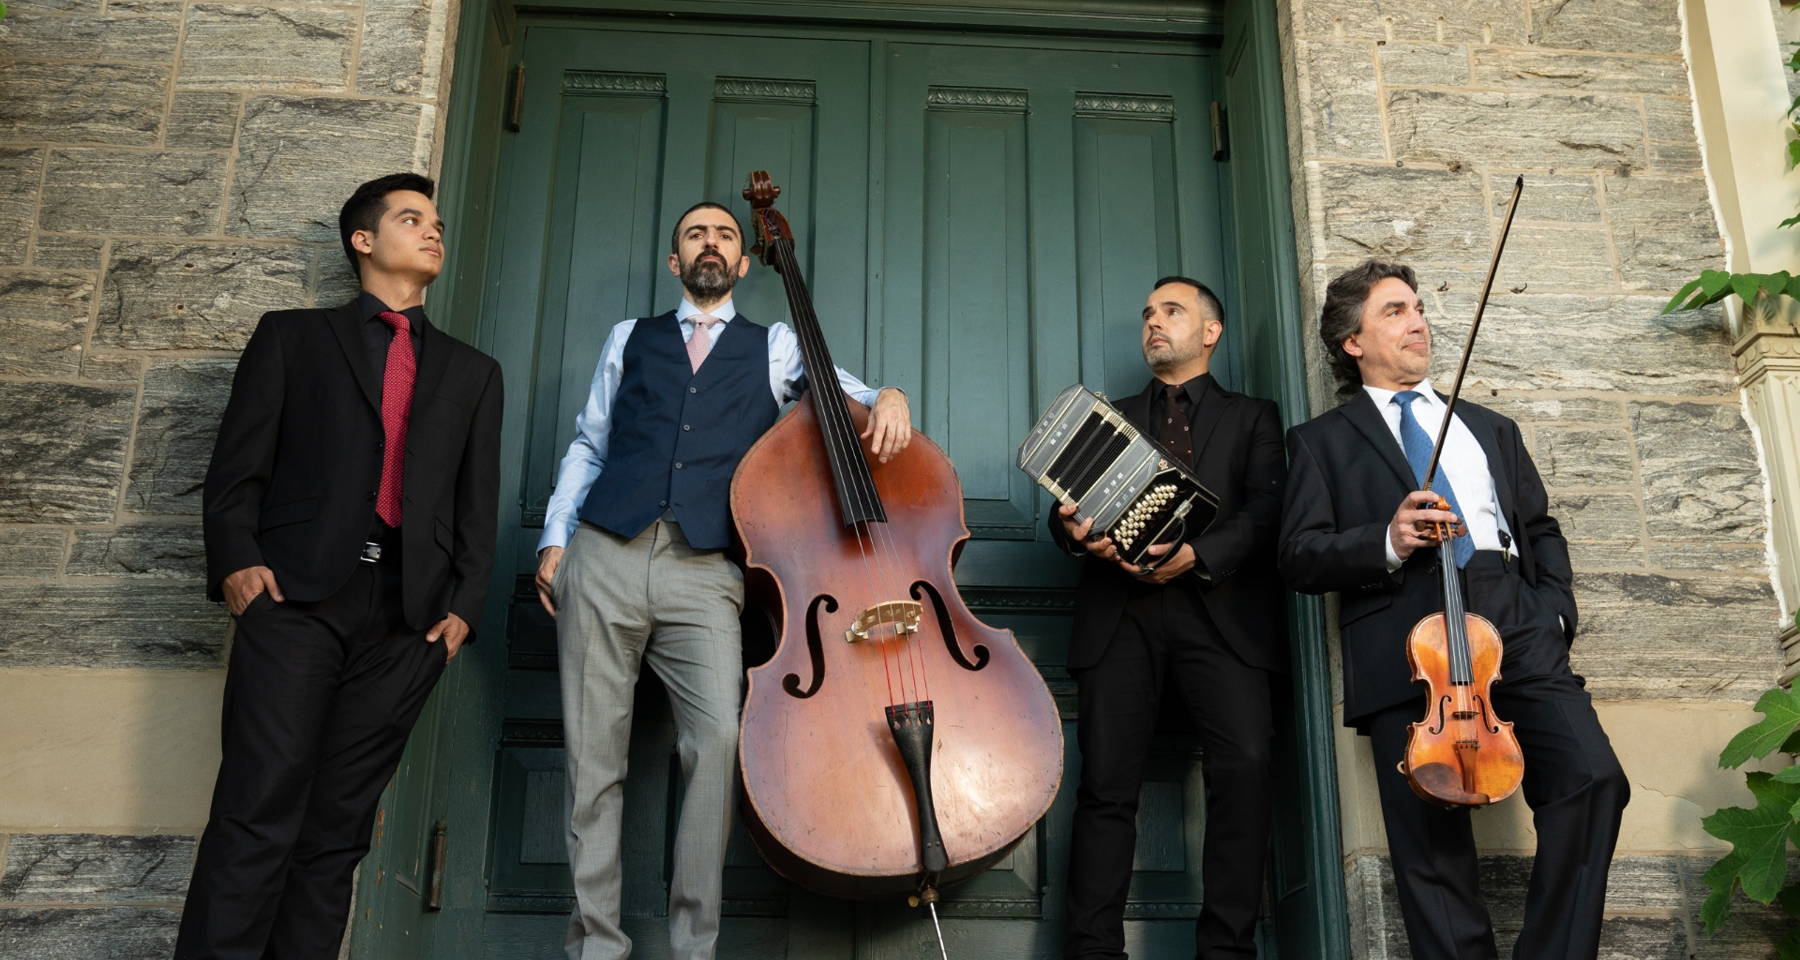  A New Direction for Spring . . .  Argentinian tango, folk, jazz, and more . . . Pedro Giraudo Quartet in a West Village townhouse